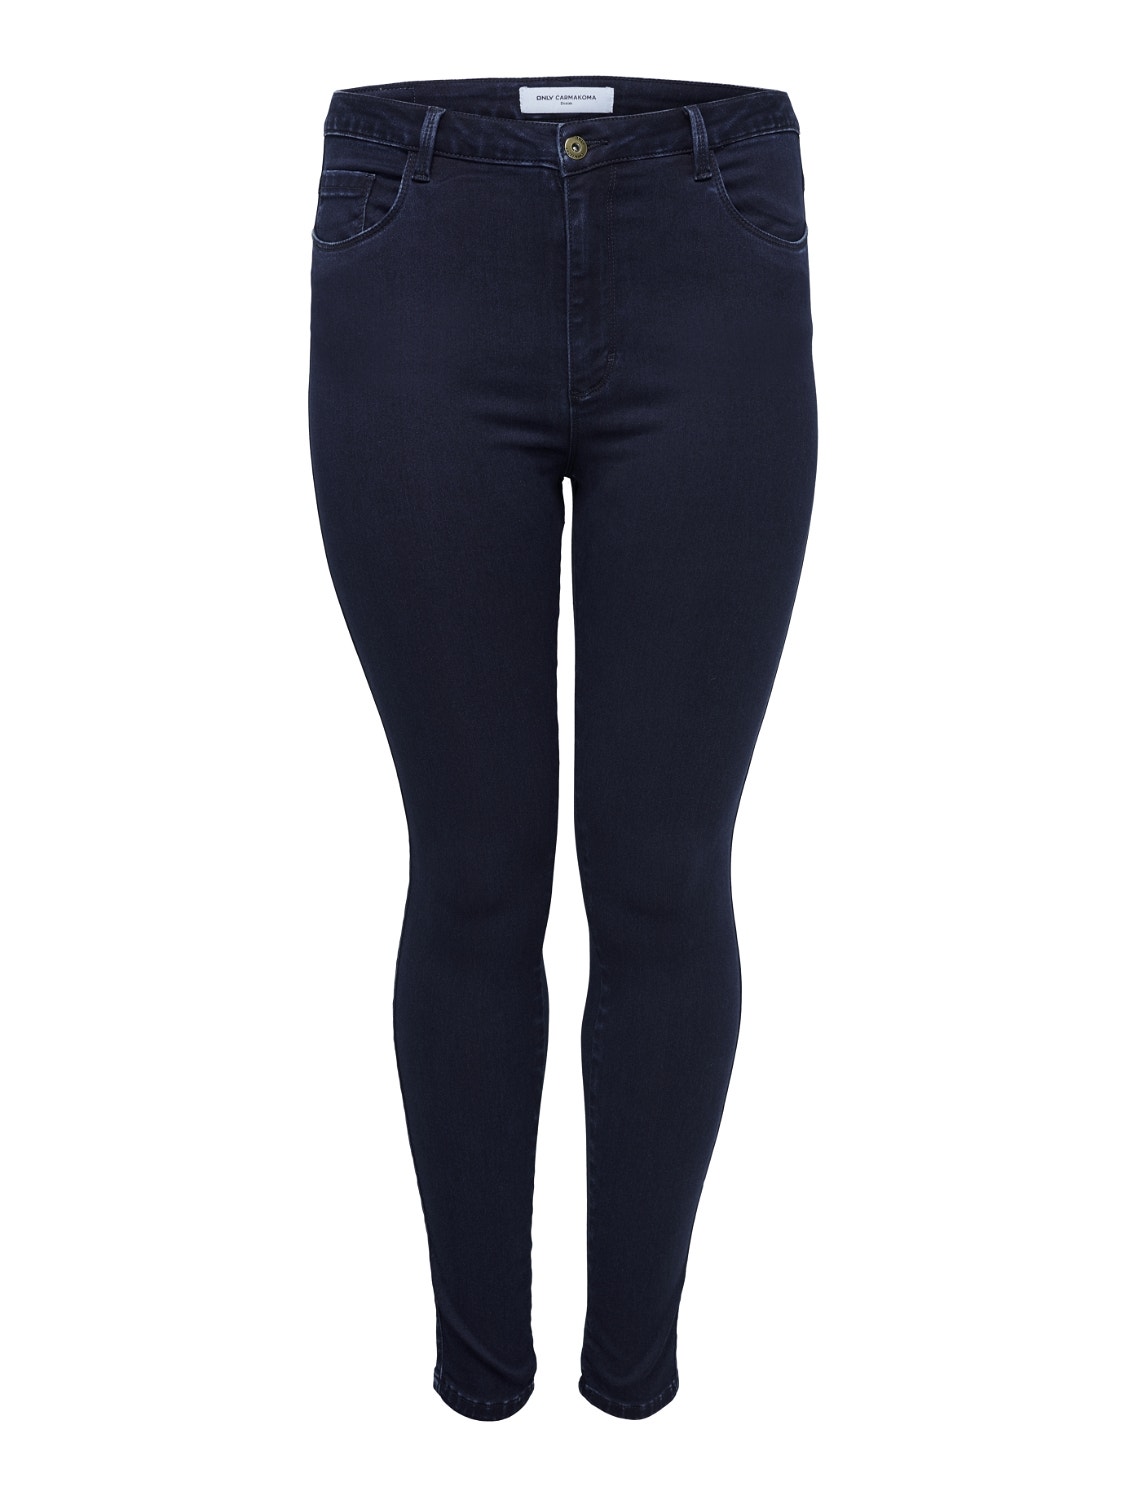 ONLY Skinny Fit Hohe Taille Jeans -Dark Blue Denim - 15186403